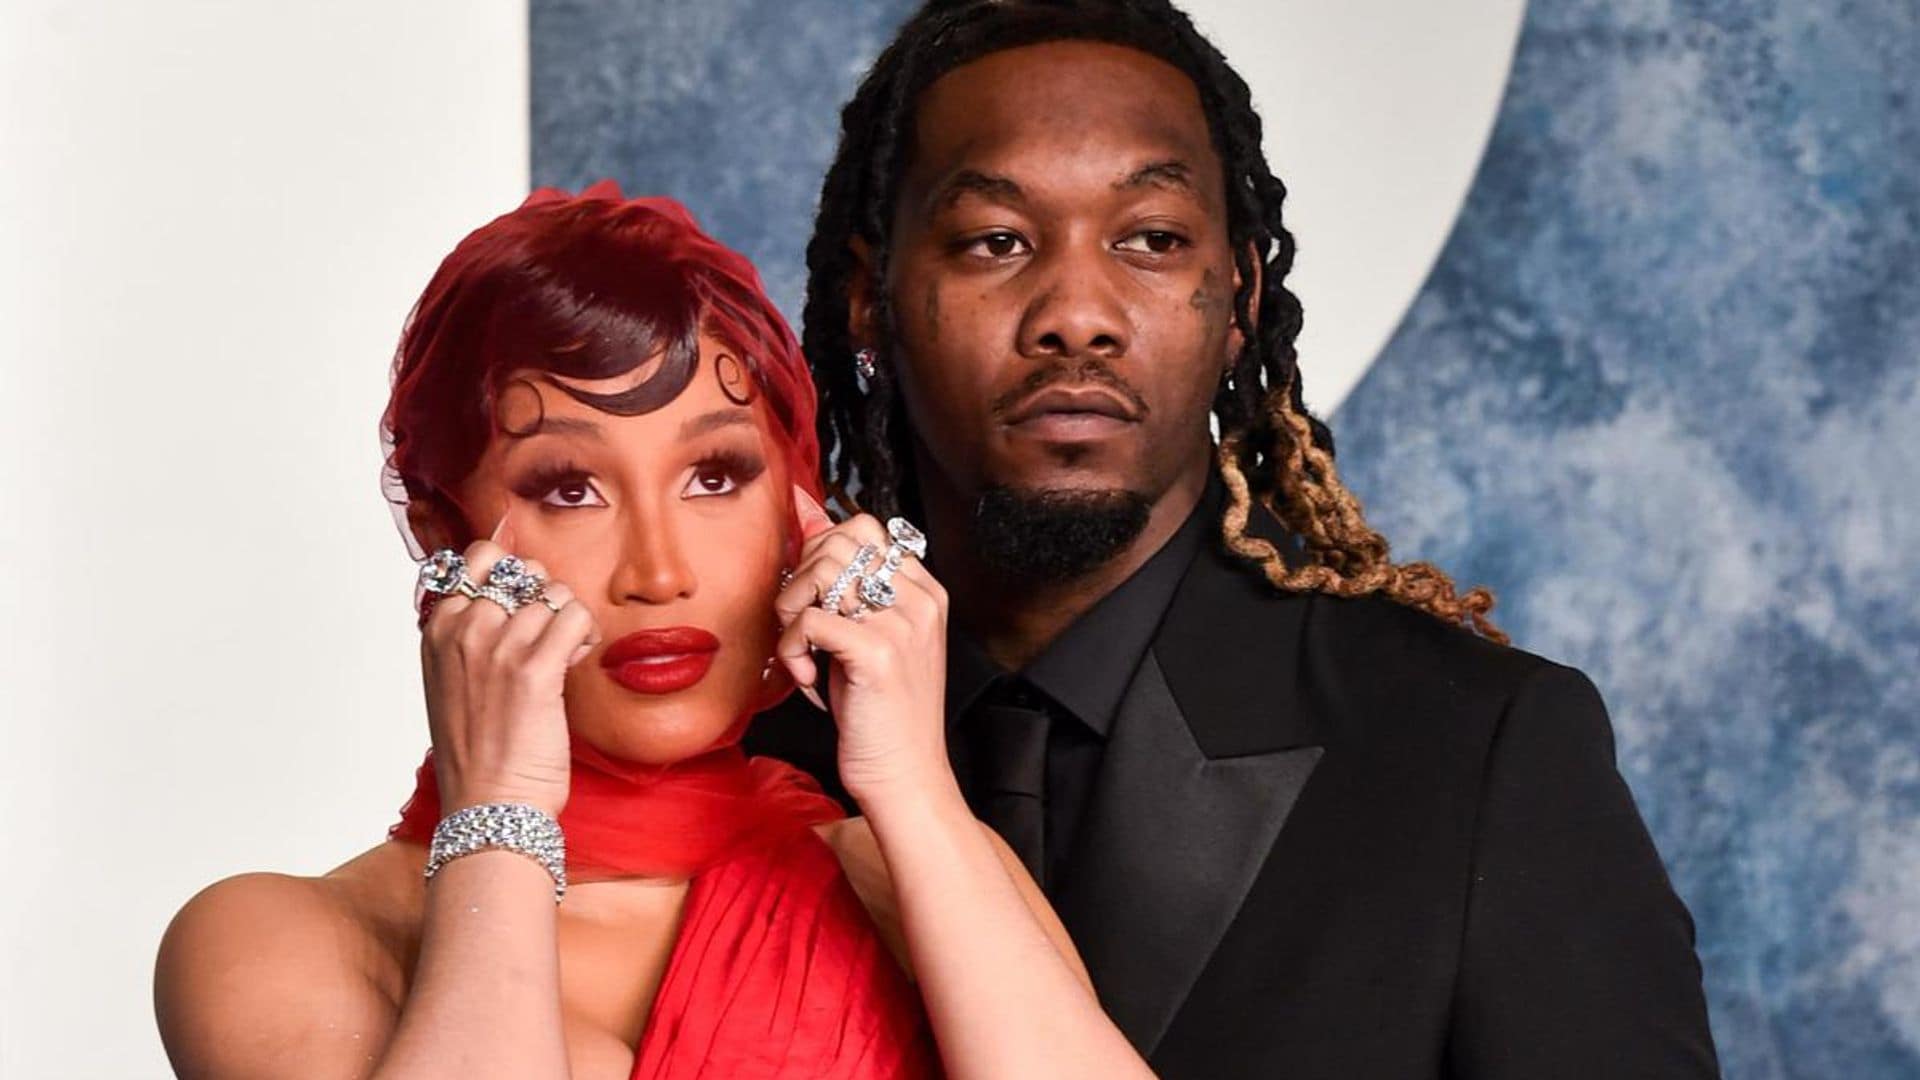 Cardi B’s message amid breakup rumors with Offset: ‘I gotta put myself first’